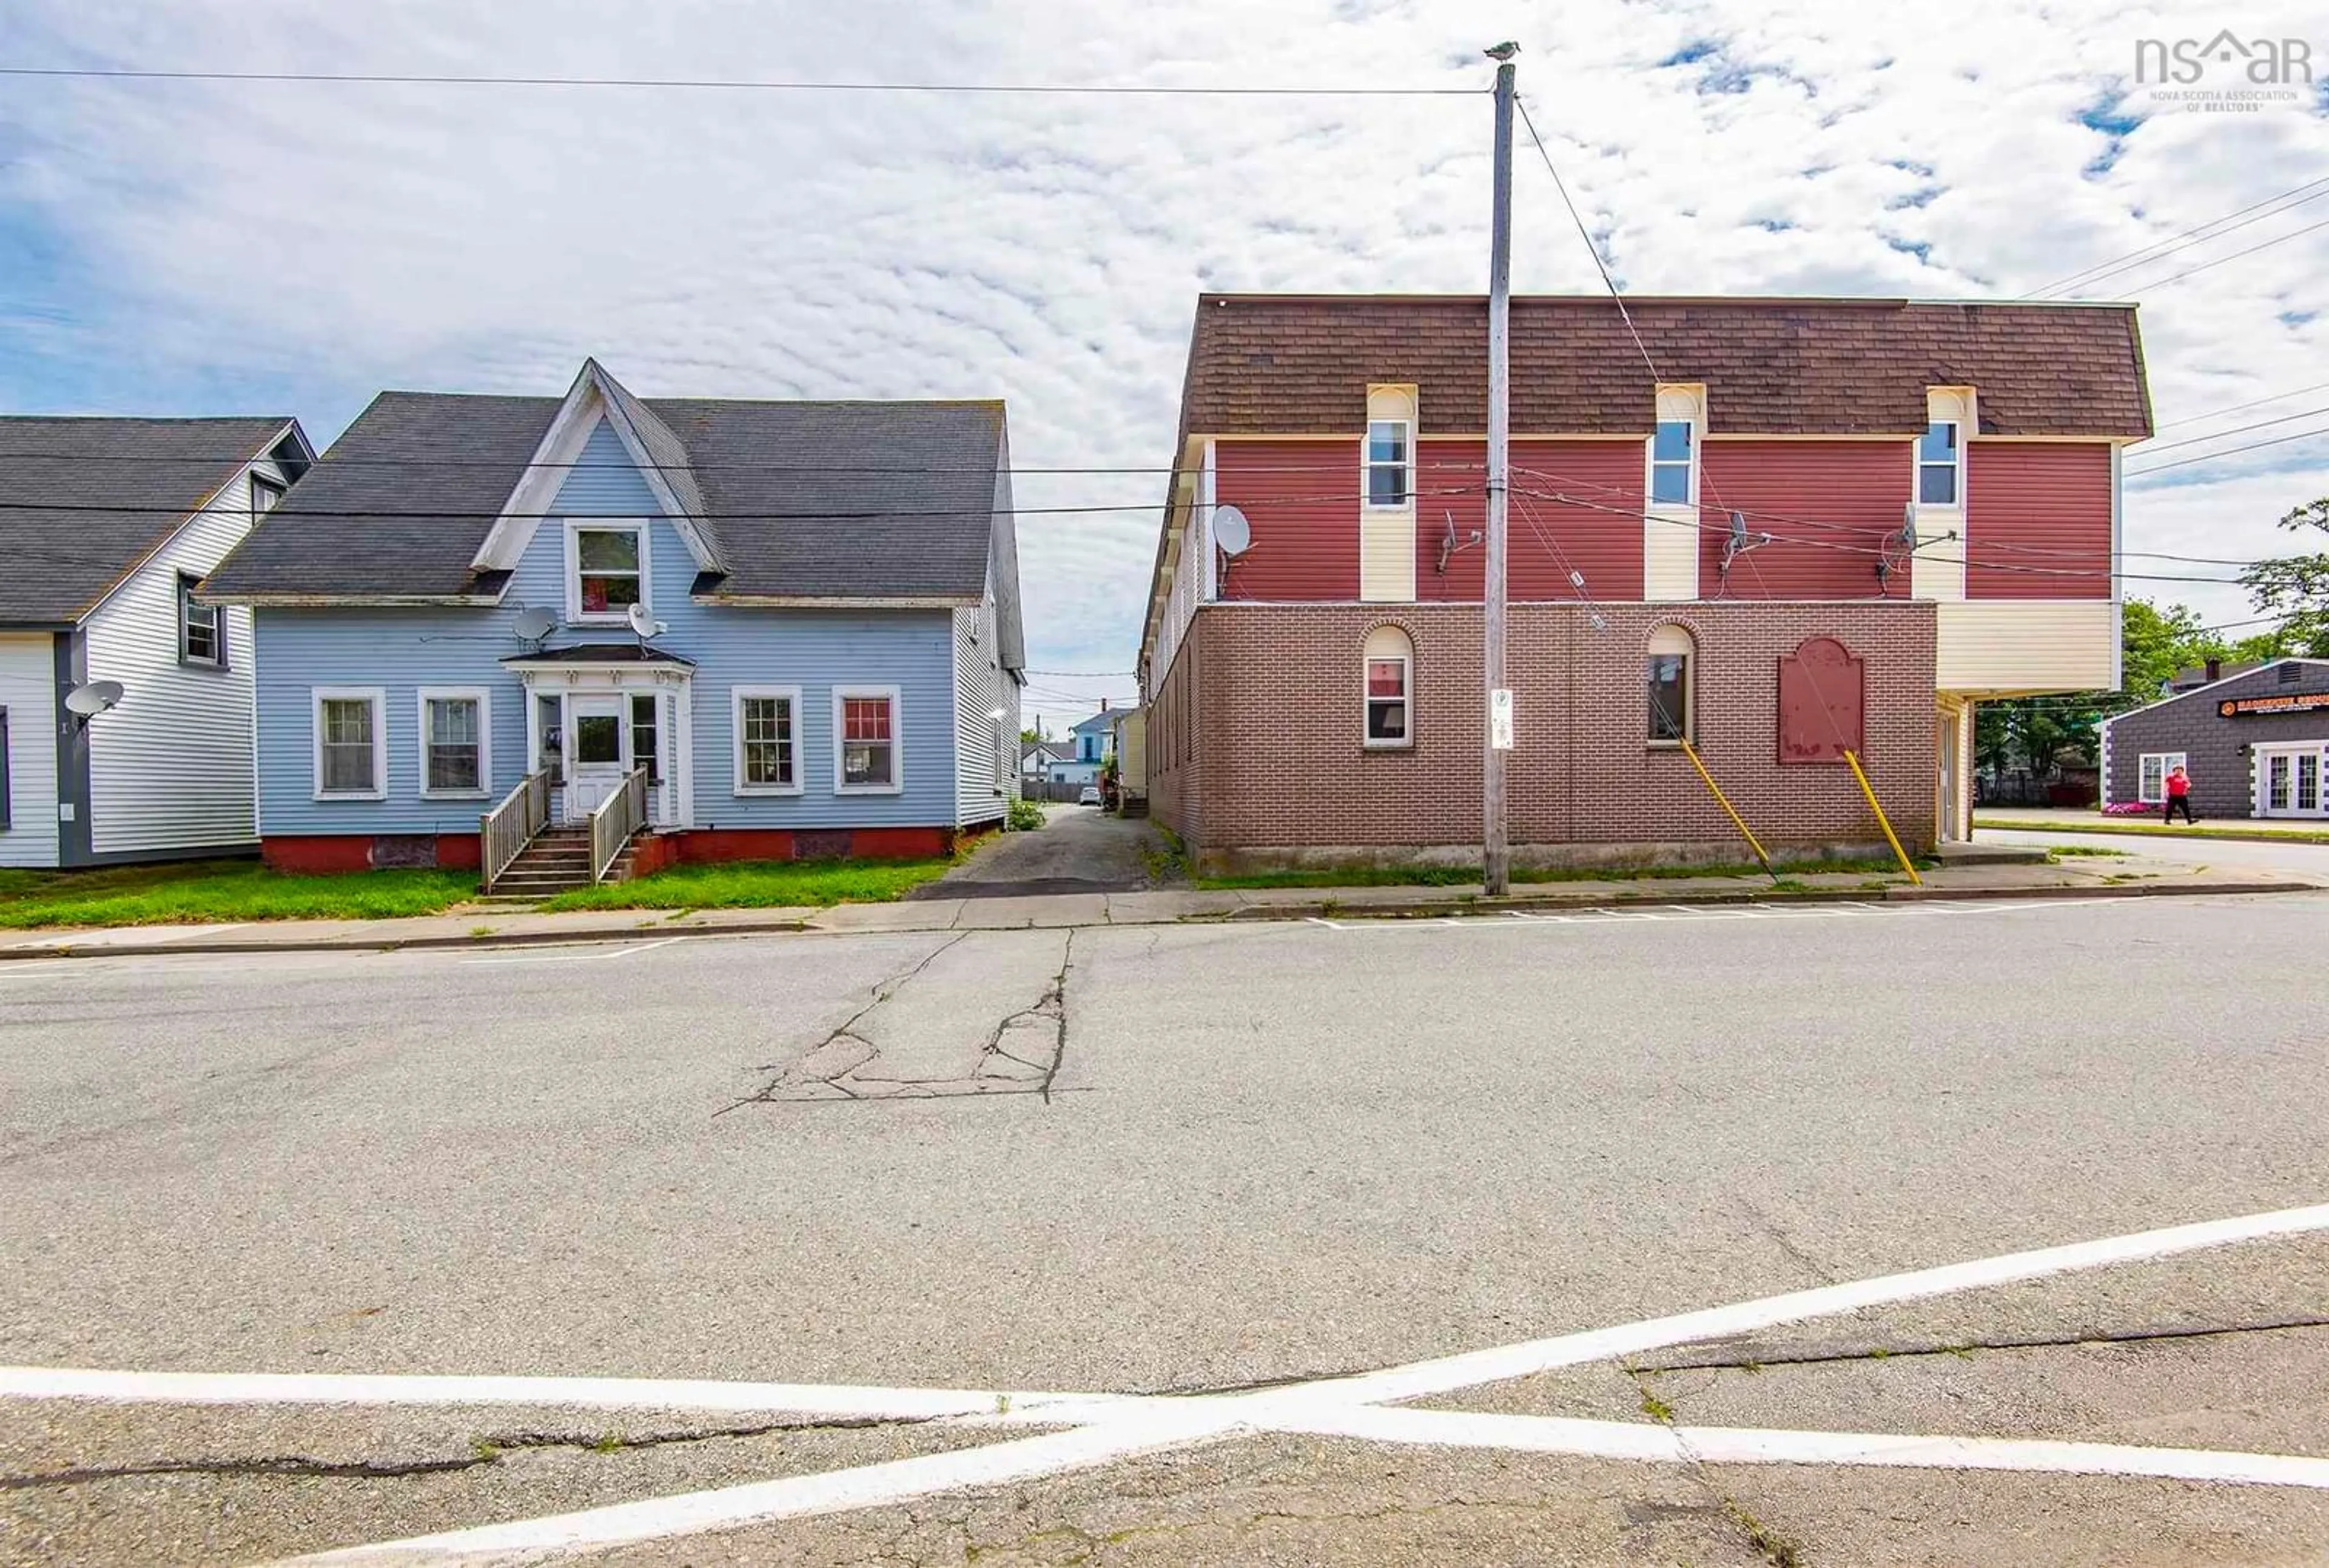 Street view for 1-2-A Kirk St, Yarmouth Nova Scotia B5A 1S6